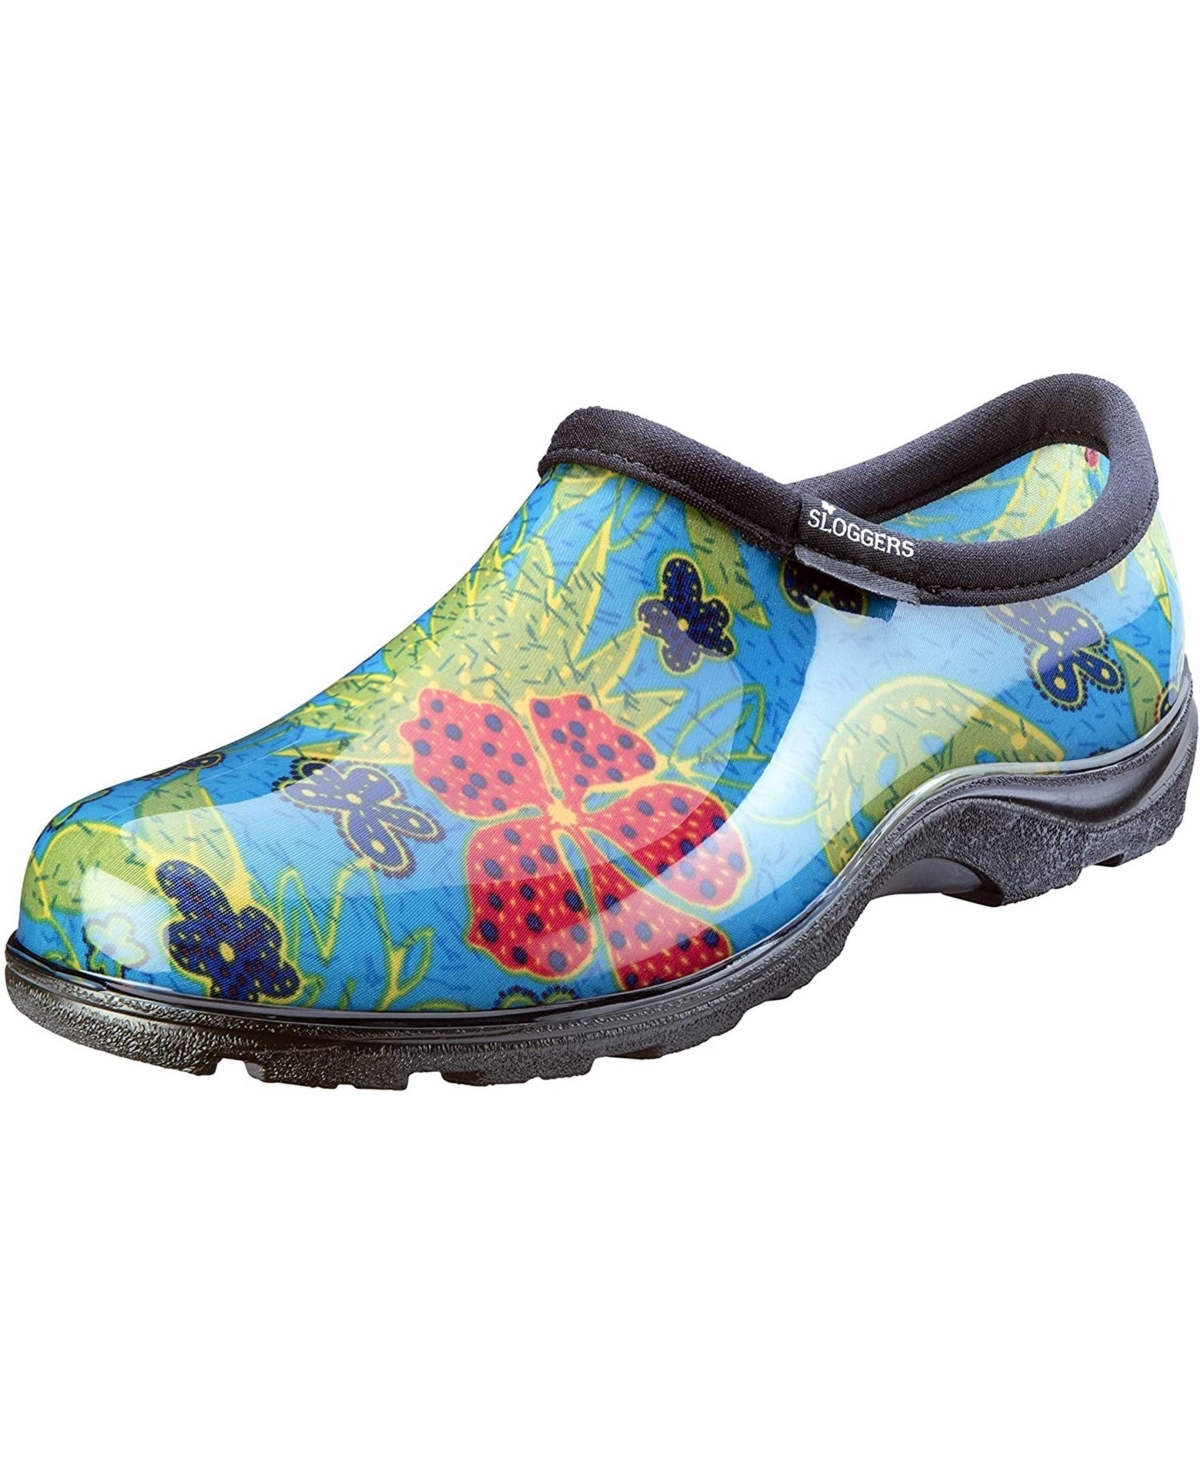 Sloggers Womens Rain And Garden Shoes, Midsummer Blue Print, Size 10 In Multi